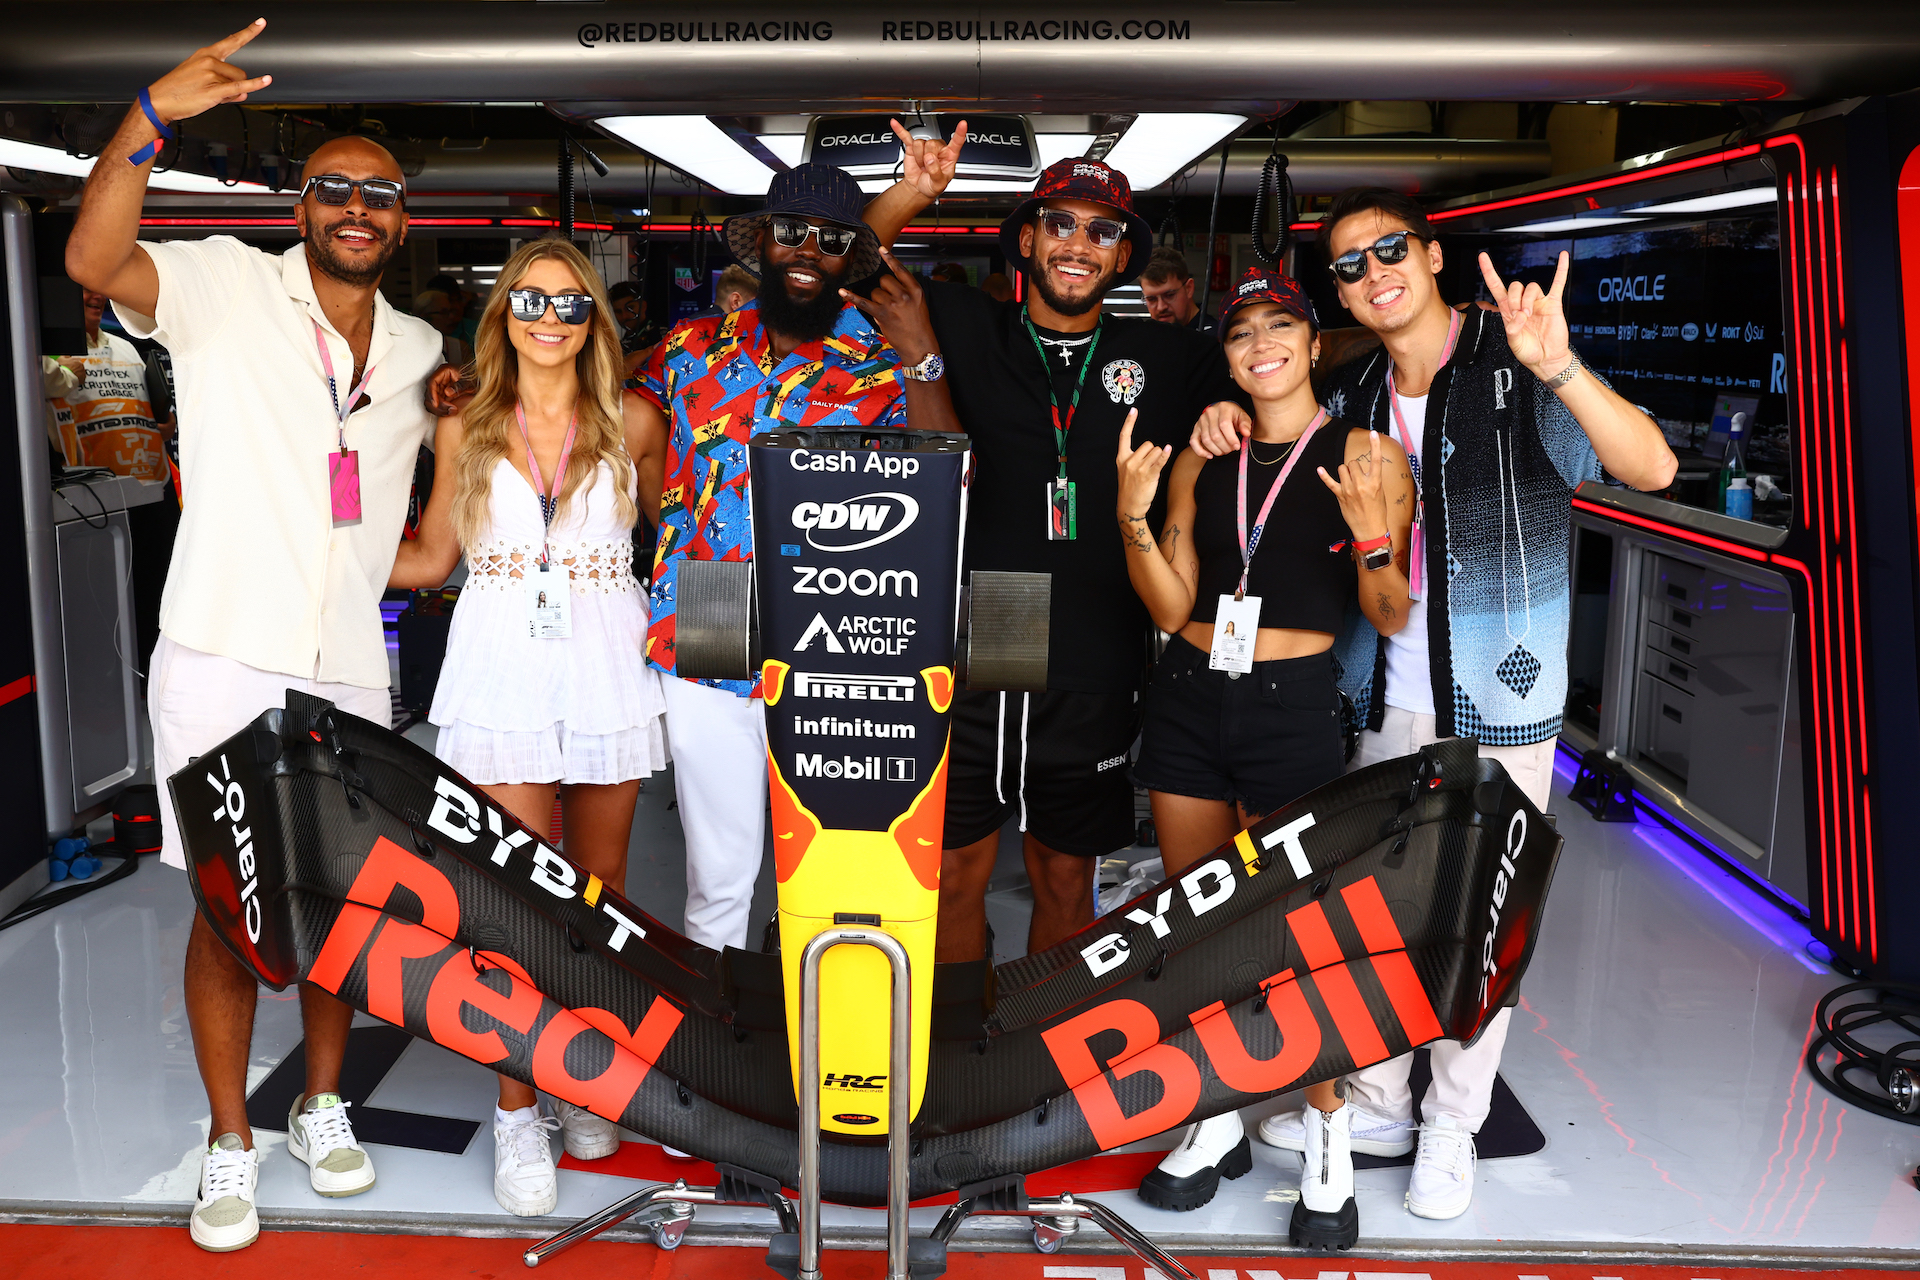 From left to right, Stefan Xavier, Kate Ovens, David Alorka, Josh Denzel, Chelcee Grimes, Michael Timbs pose for a photo in the Red Bull Racing garage prior to the F1 Grand Prix of United States at Circuit of The Americas on October 22, 2023 in Austin, Texas. They are smiling and most are doing the "hook 'em horns" hand gesture.